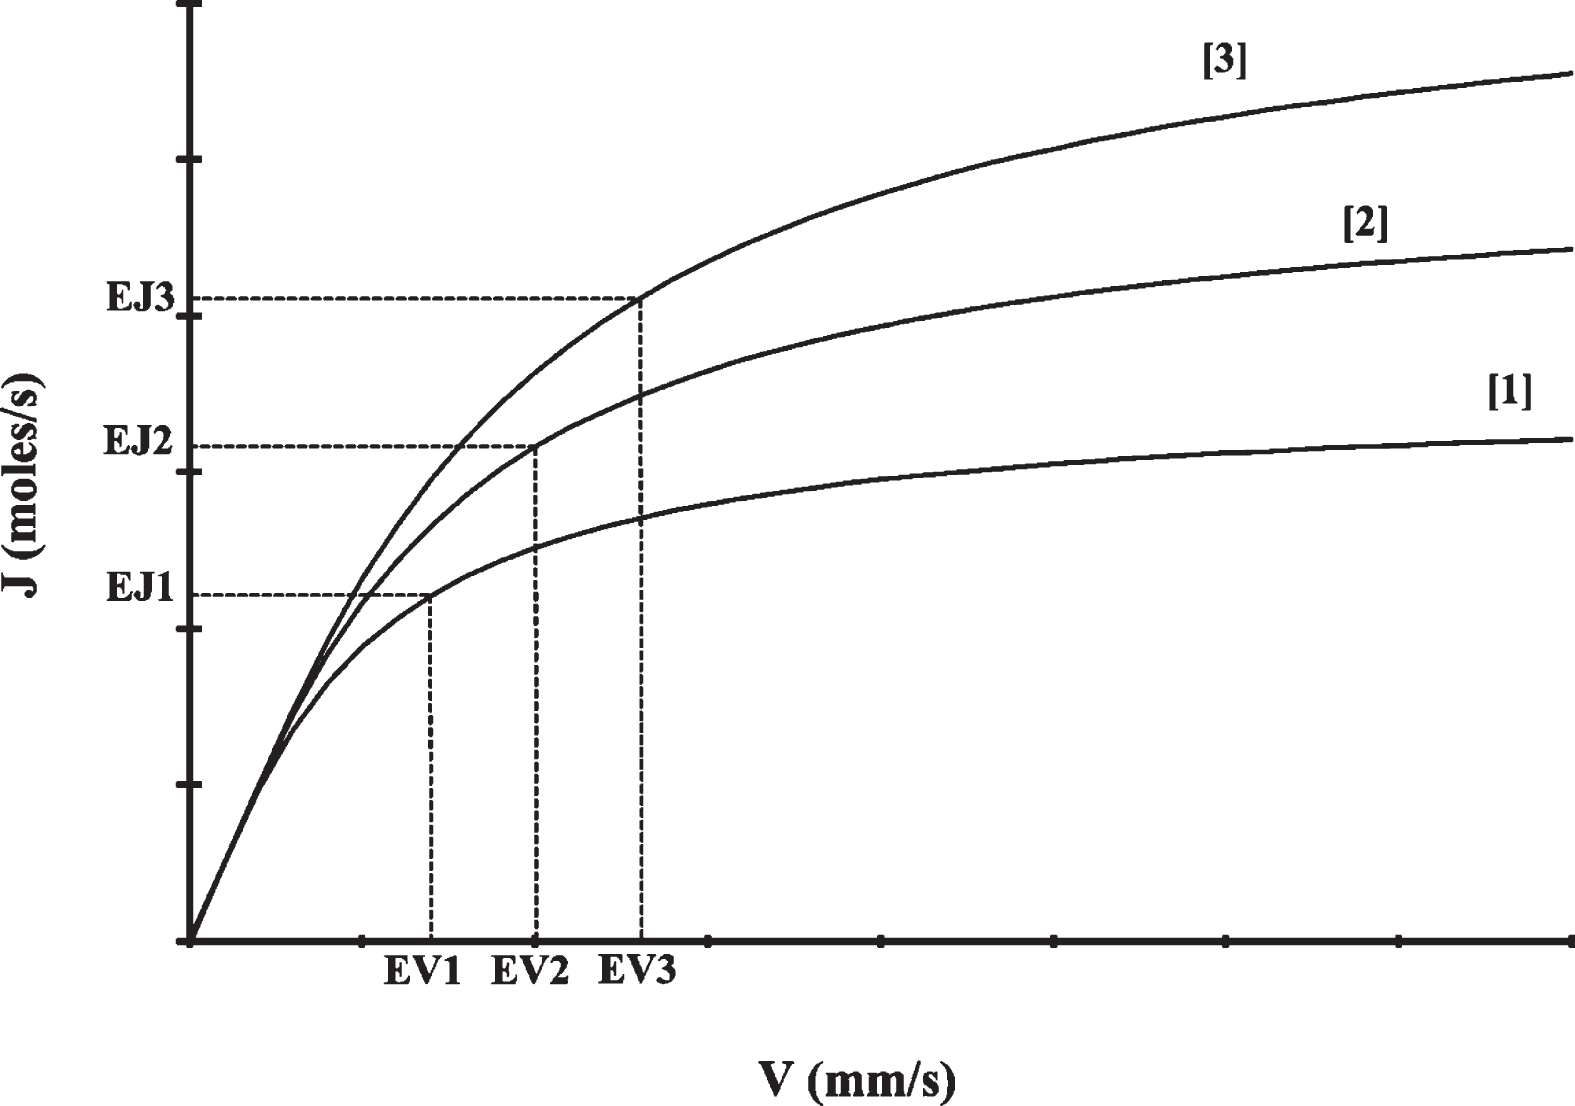 The velocity-diffusion (V-J) curves for 3 different microvessels with the same diameters. EV1, EV2 and EV3 are equilibrium axial blood velocities of microvessel 1, 2, and 3, respectively. EJ1, EJ2 and EJ3 are equilibrium mass diffusion rates of microvessel 1, 2, and 3, respectively.